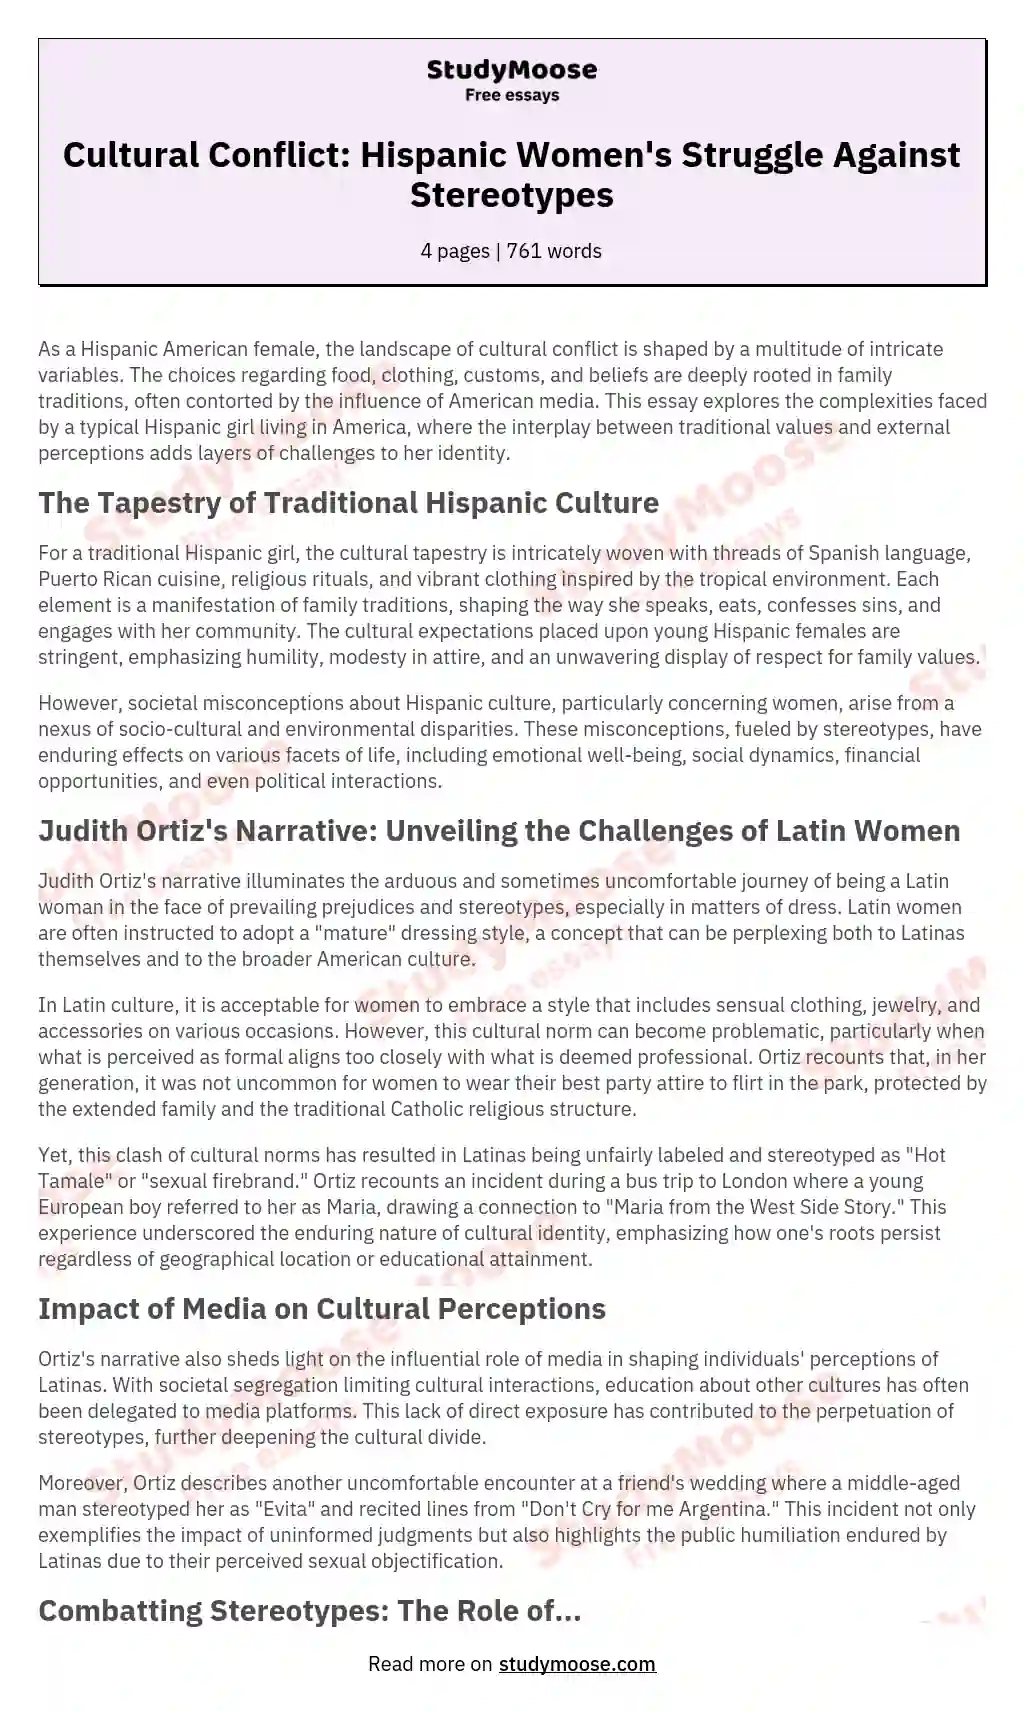 Cultural Conflict: Hispanic Women's Struggle Against Stereotypes essay